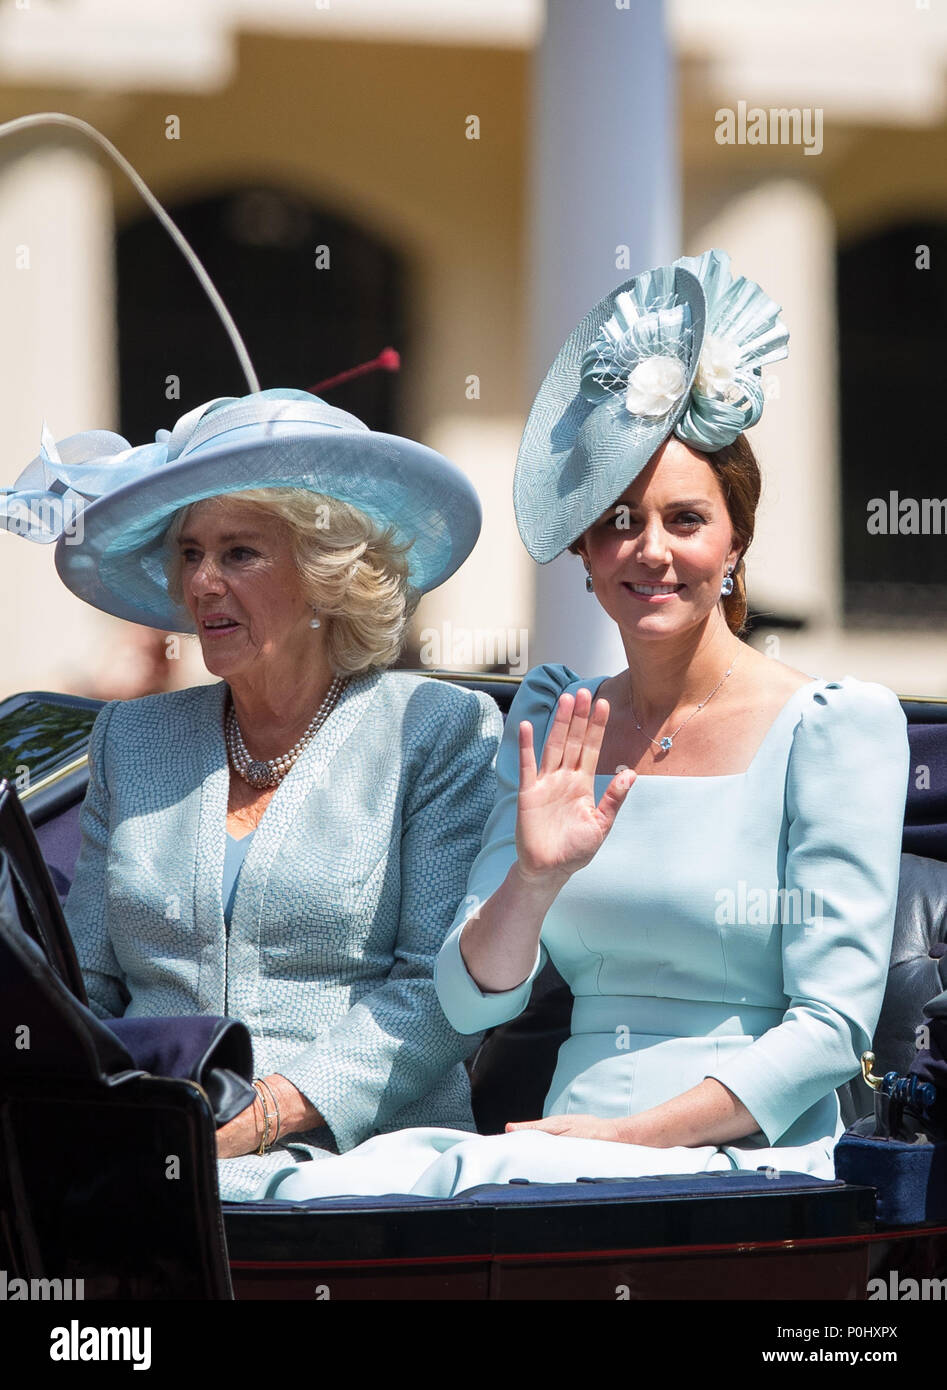 London, UK, 9 June 2018. Catherine, Duchess of Cambridge (Kate Middleton) as she sits beside Camilla, Duchess of Cornwall during Trooping the Colour - Queen Elizabeth II Birthday Parade 2018 at The Mall, Buckingham Palace, England on 9 June 2018. Photo by Andy Rowland. Credit: Andrew Rowland/Alamy Live News Credit: Andrew Rowland/Alamy Live News Stock Photo